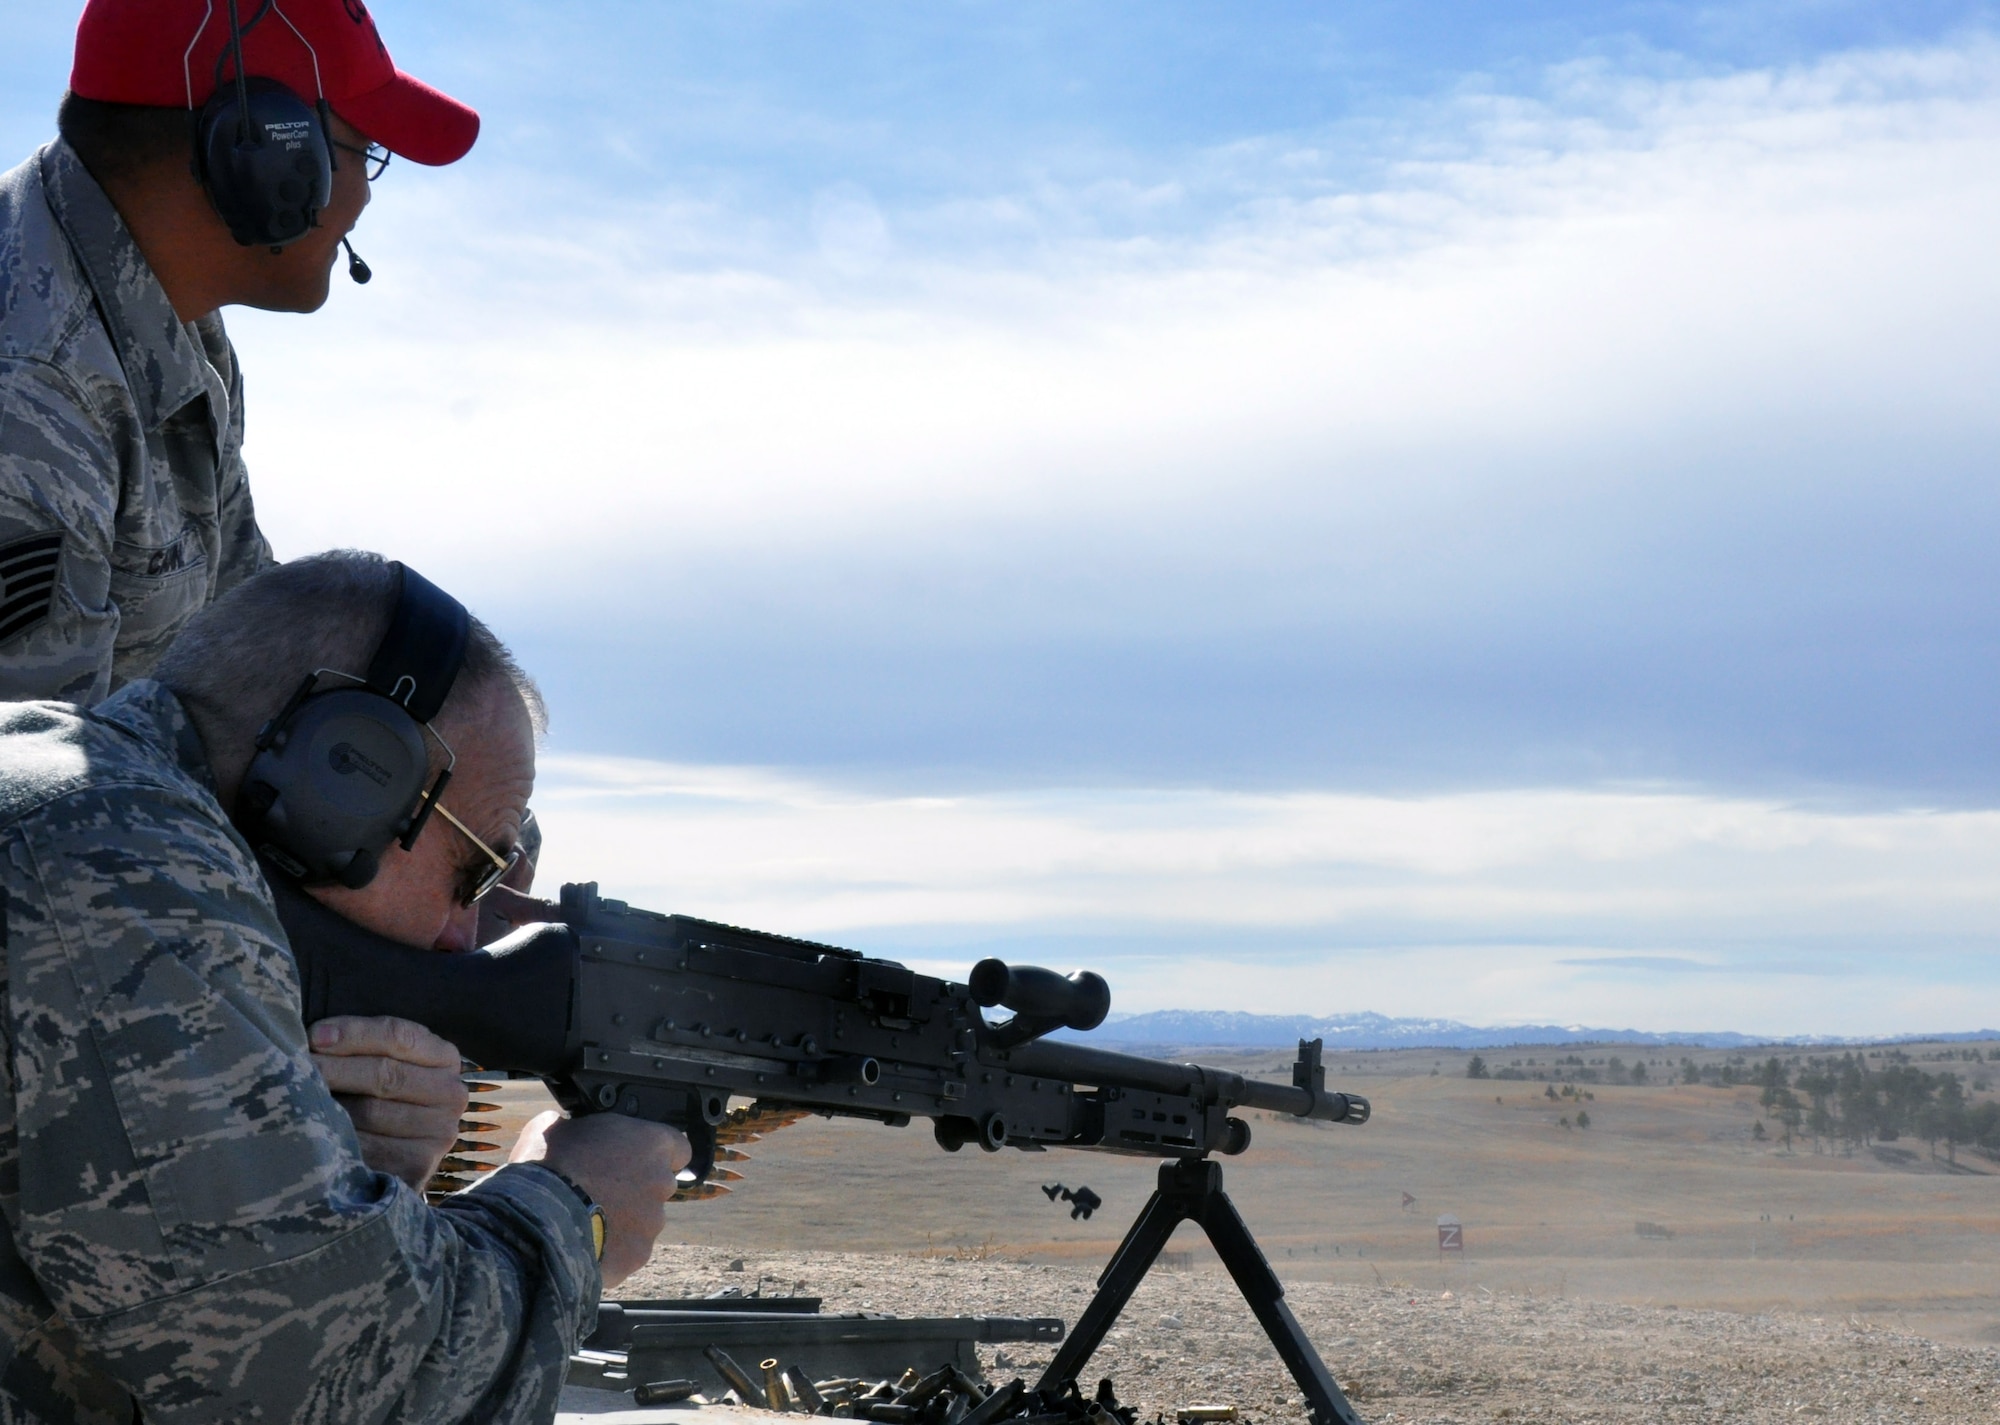 Lt. Gen. Jim Kowalski, Air Force Global Strike Command commander, fires the M-249 light machine gun, with assistance provided by Tech. Sgt. Michael Canne, 90th Ground Combat Training Squadron Combat Arms team leader, on the north firing range of Camp Guernsey, March 14.  The Ground Combat Training Squadron located in Guernsey, Wyo., provides ground combat skills and marksmanship training to ensure people are prepared for a variety of contingency situations. (U.S. Air Force by 1st Lt. Brooke Brzozowske)